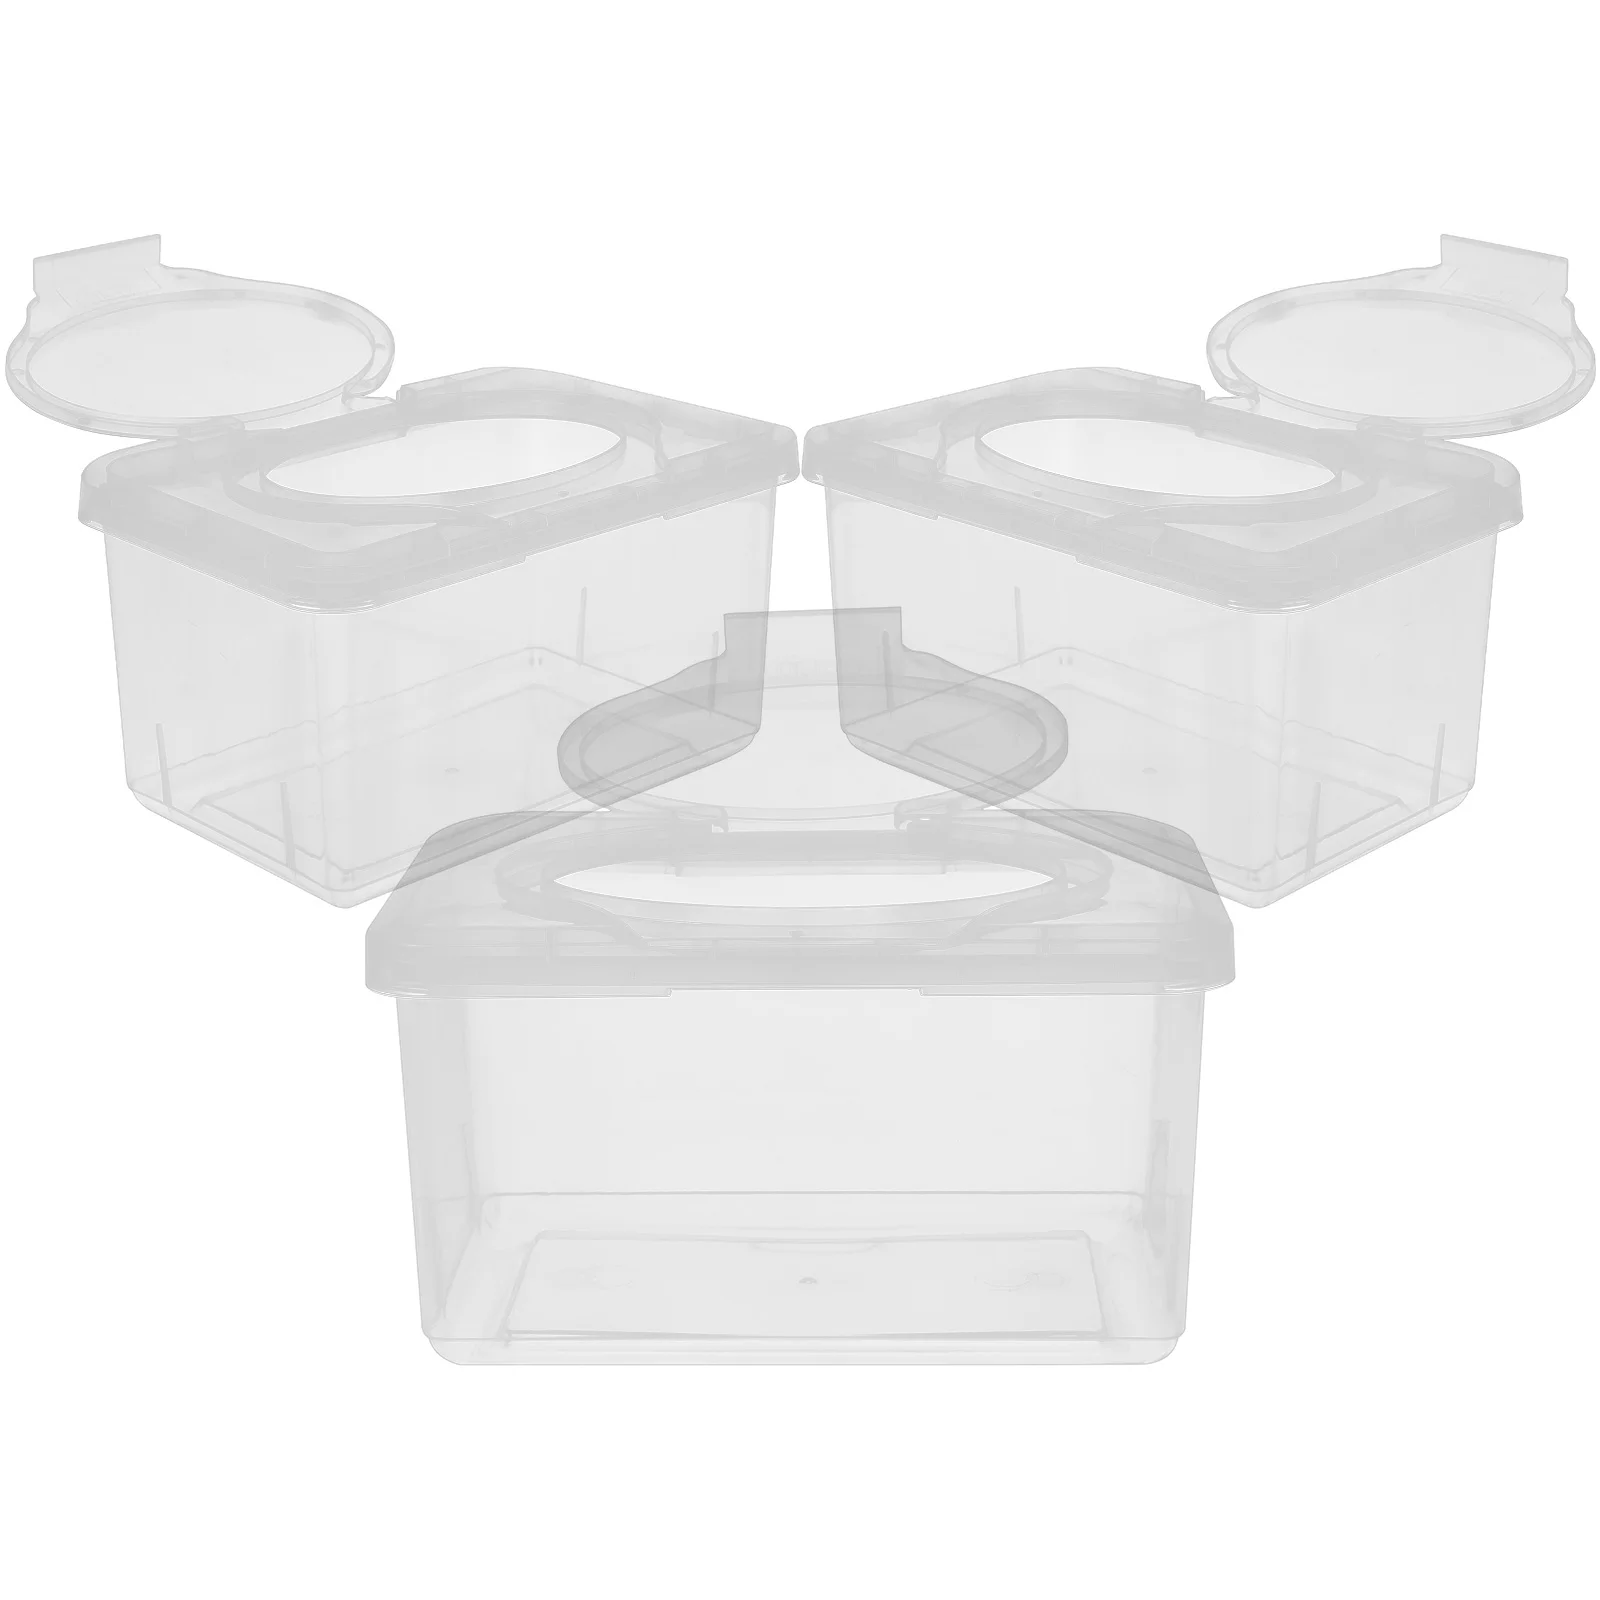 

3Pcs Portable Baby Wipes Dispensers Wet Tissue Containers Wet Wipes Storage Boxes